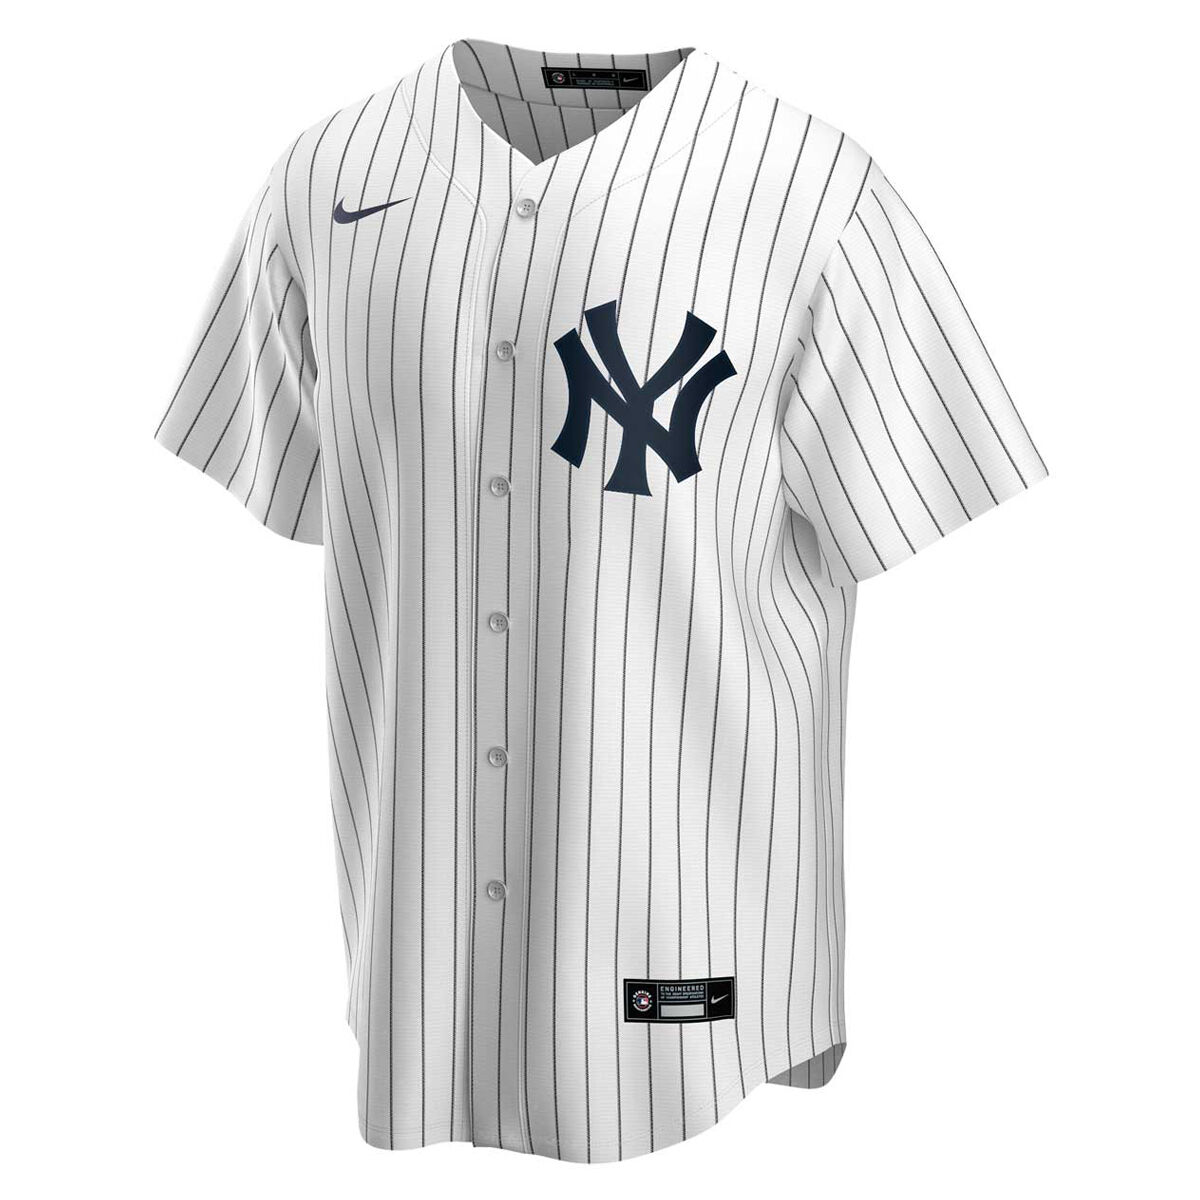 NEW YORK METS "AUTHENTIC COLLECTION" PRO-CUT PINSTRIPE MAJESTIC  MLB JERSEY NWT $